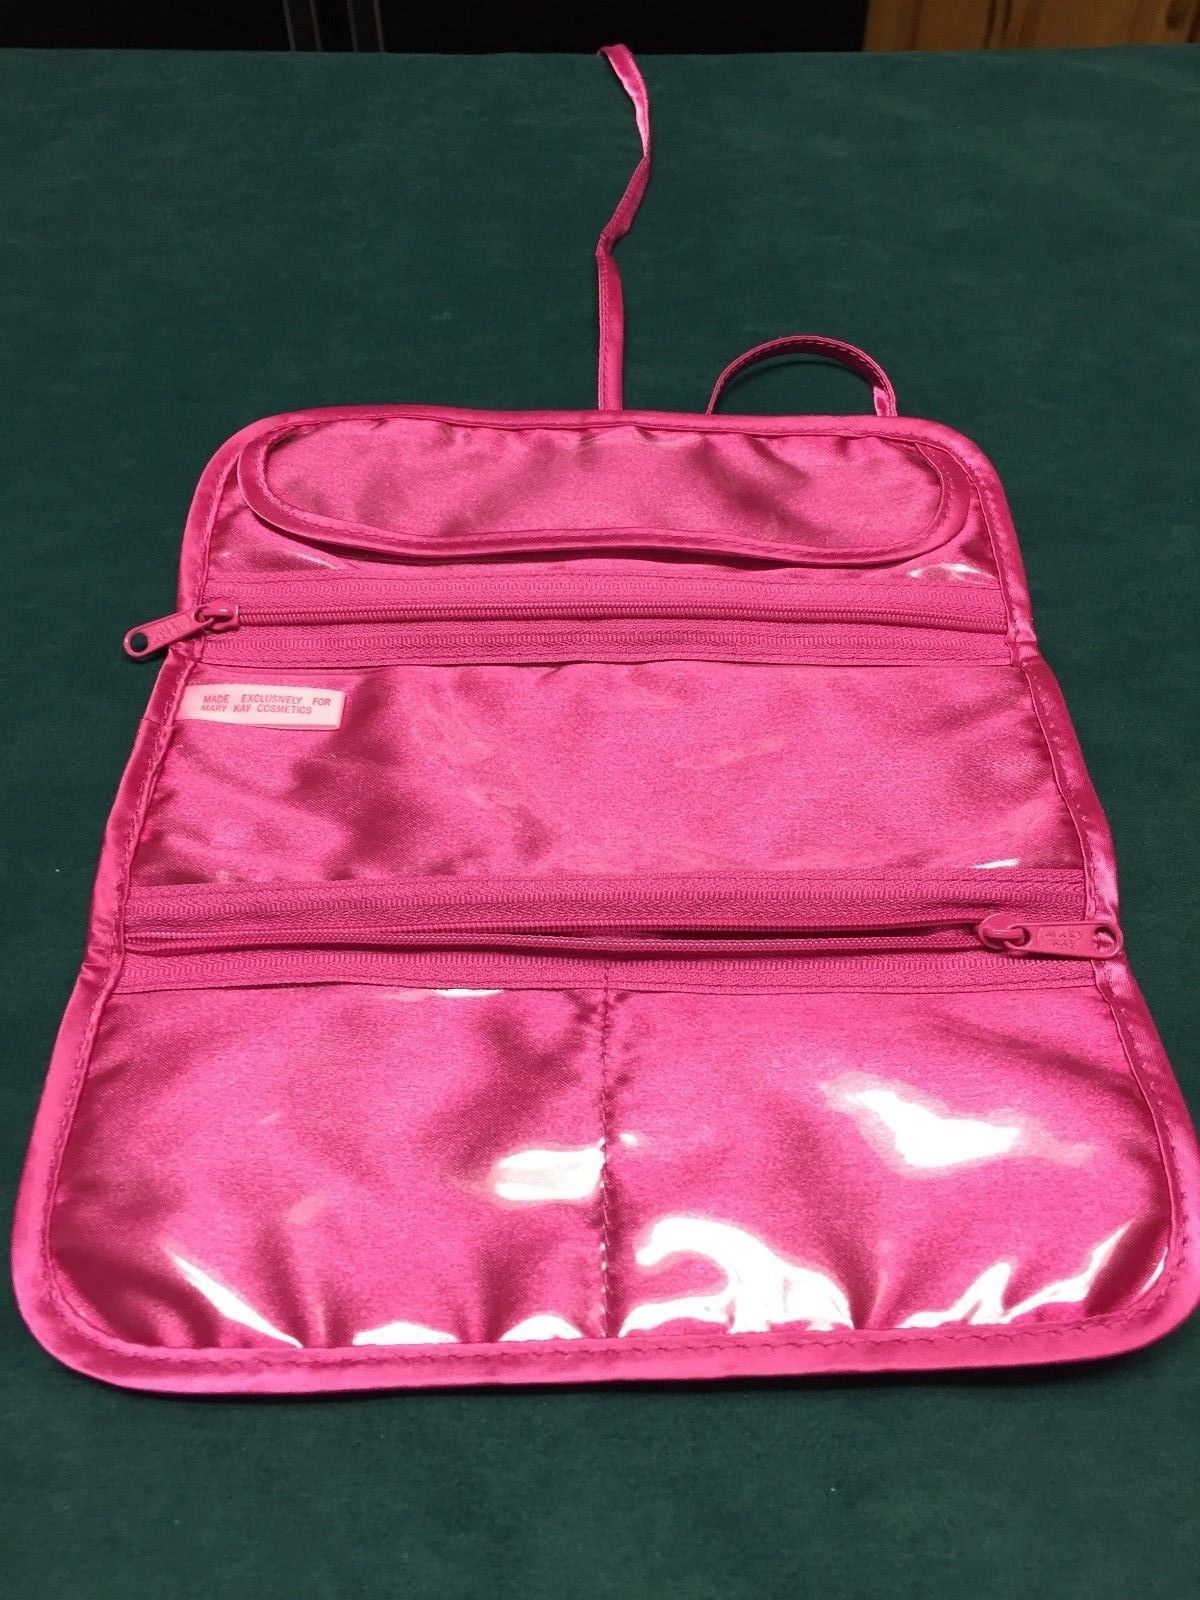 Primary image for Vintage Mary Kay Makeup Roll Up Travel Bag or Jewelry Case Hot Pink